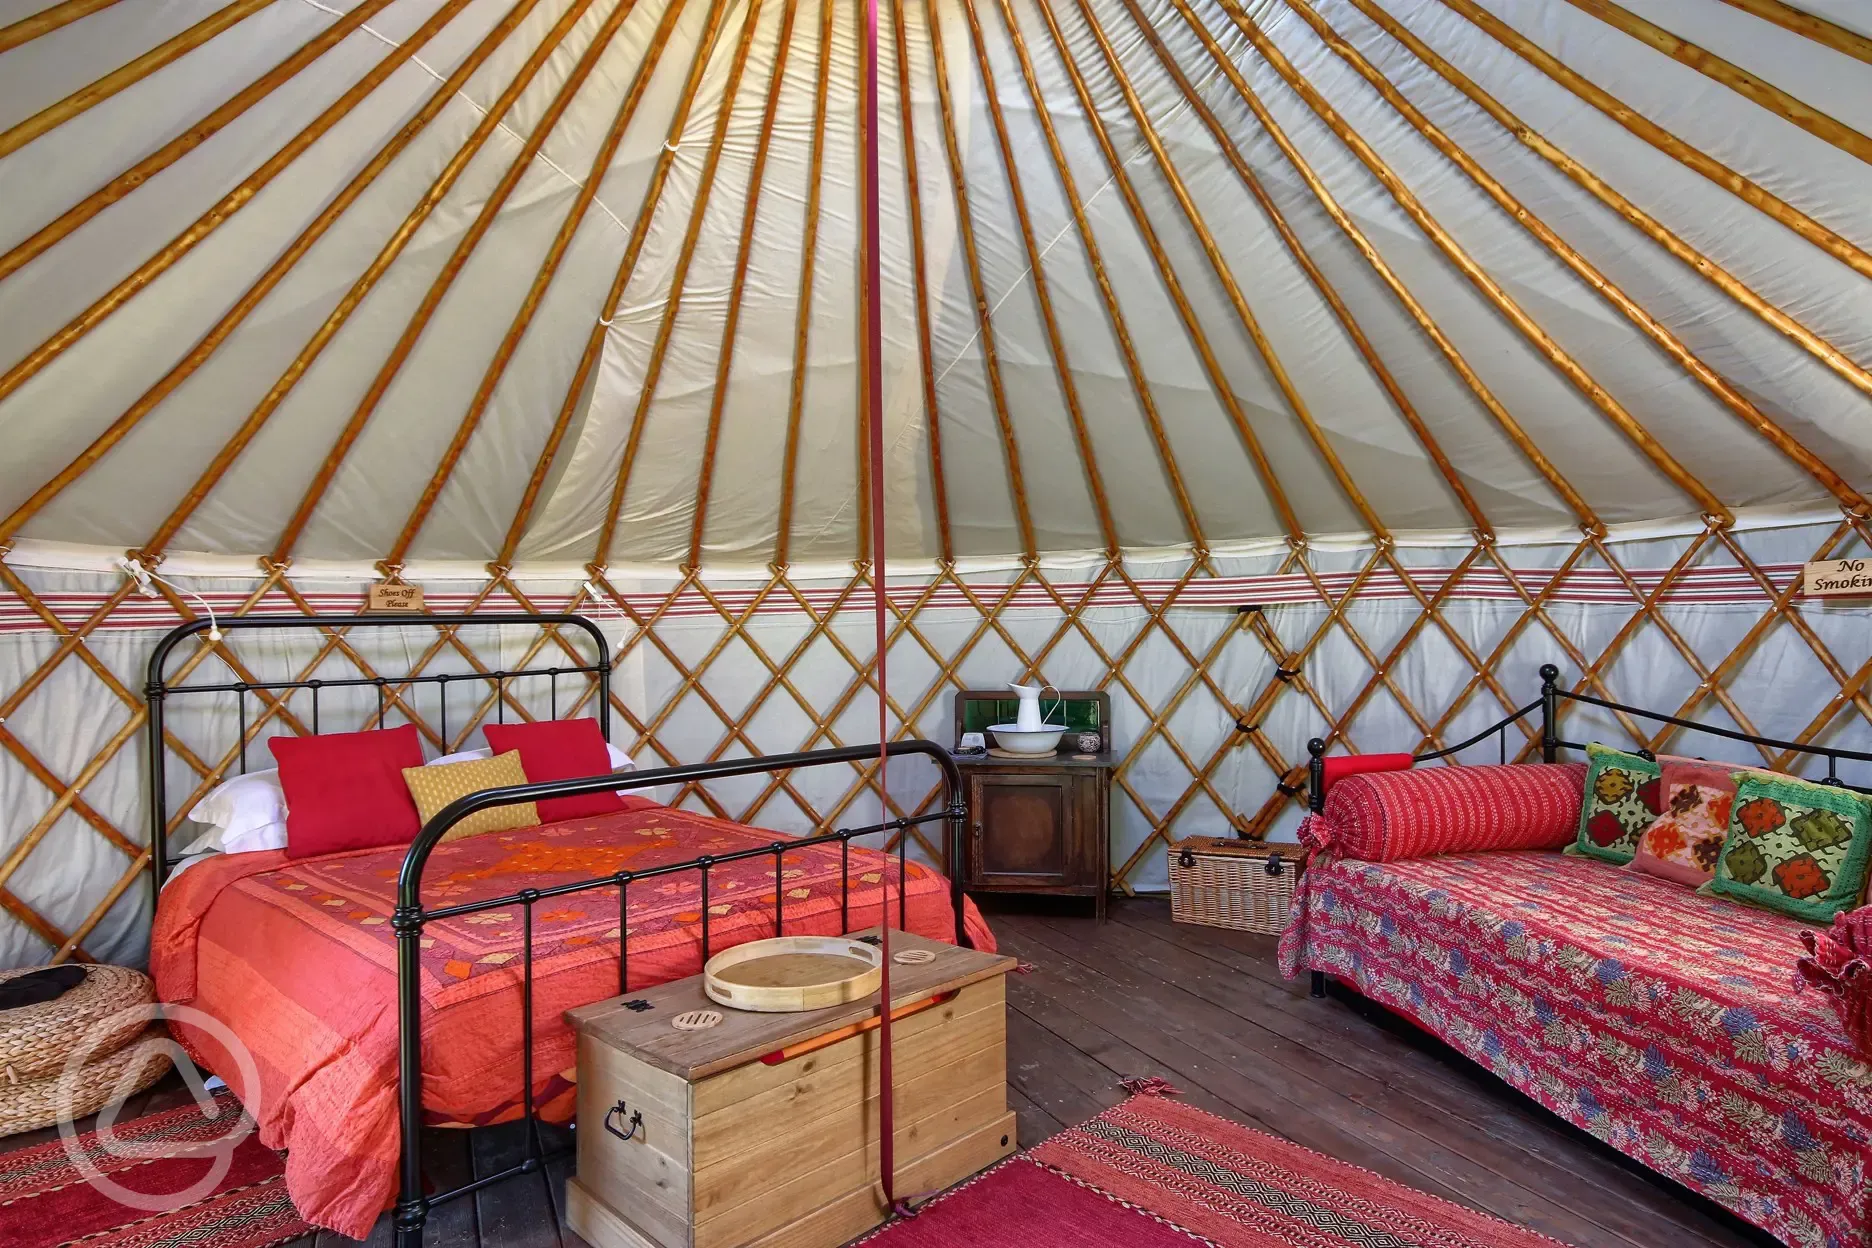 Luxury yurt king size beds and daybeds